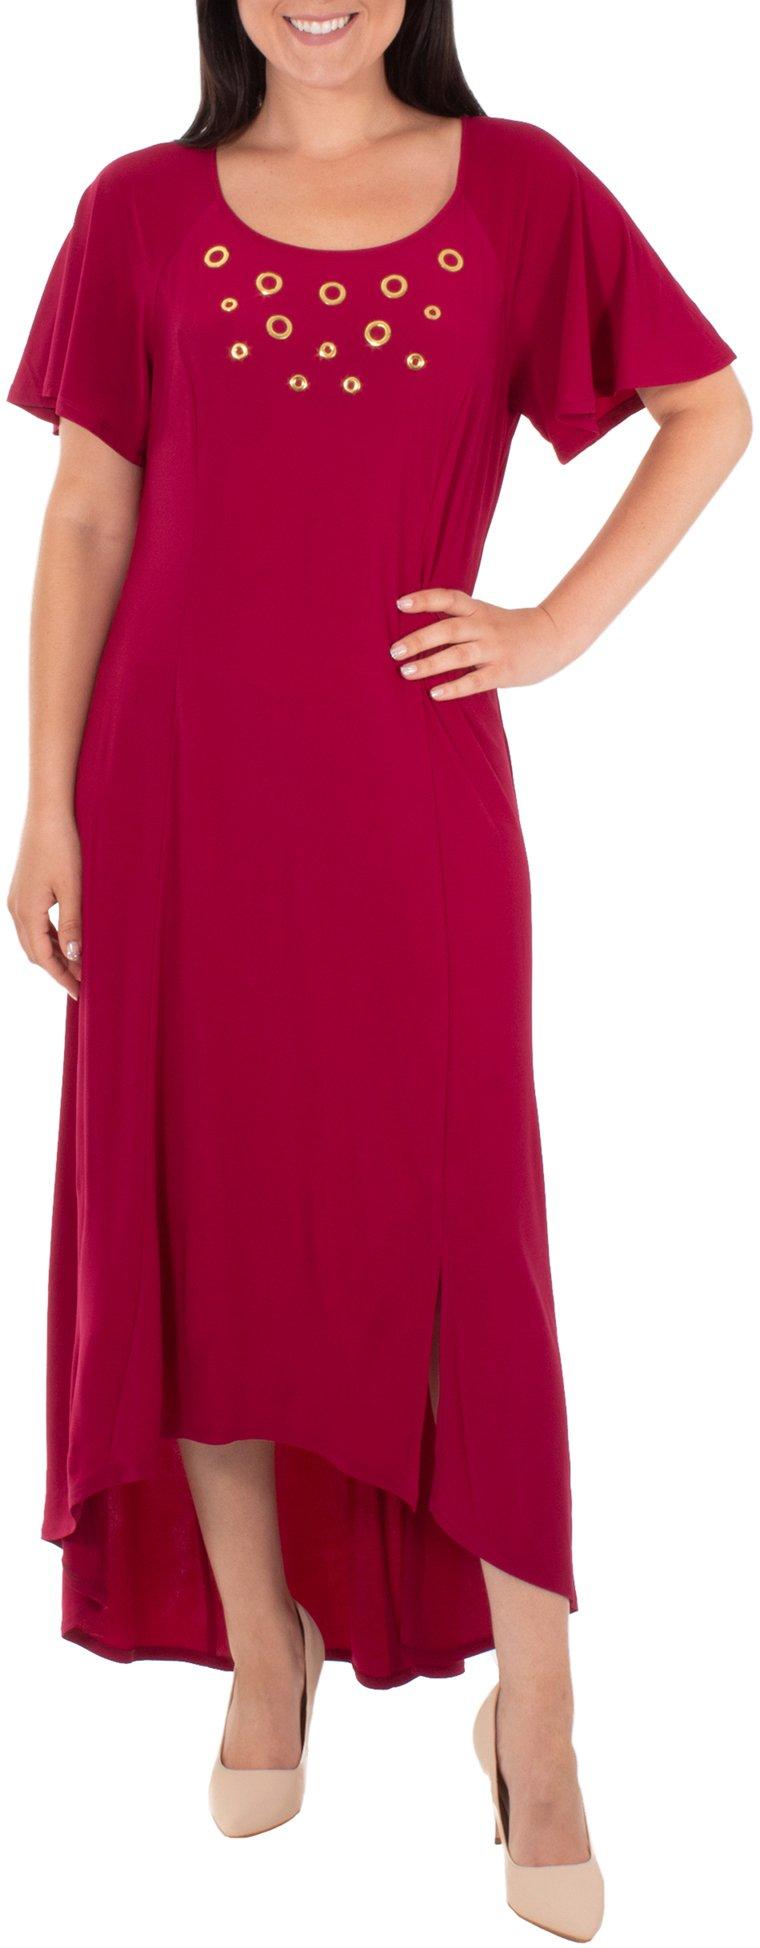 NY Collection Petite Embellished High-Low Dress